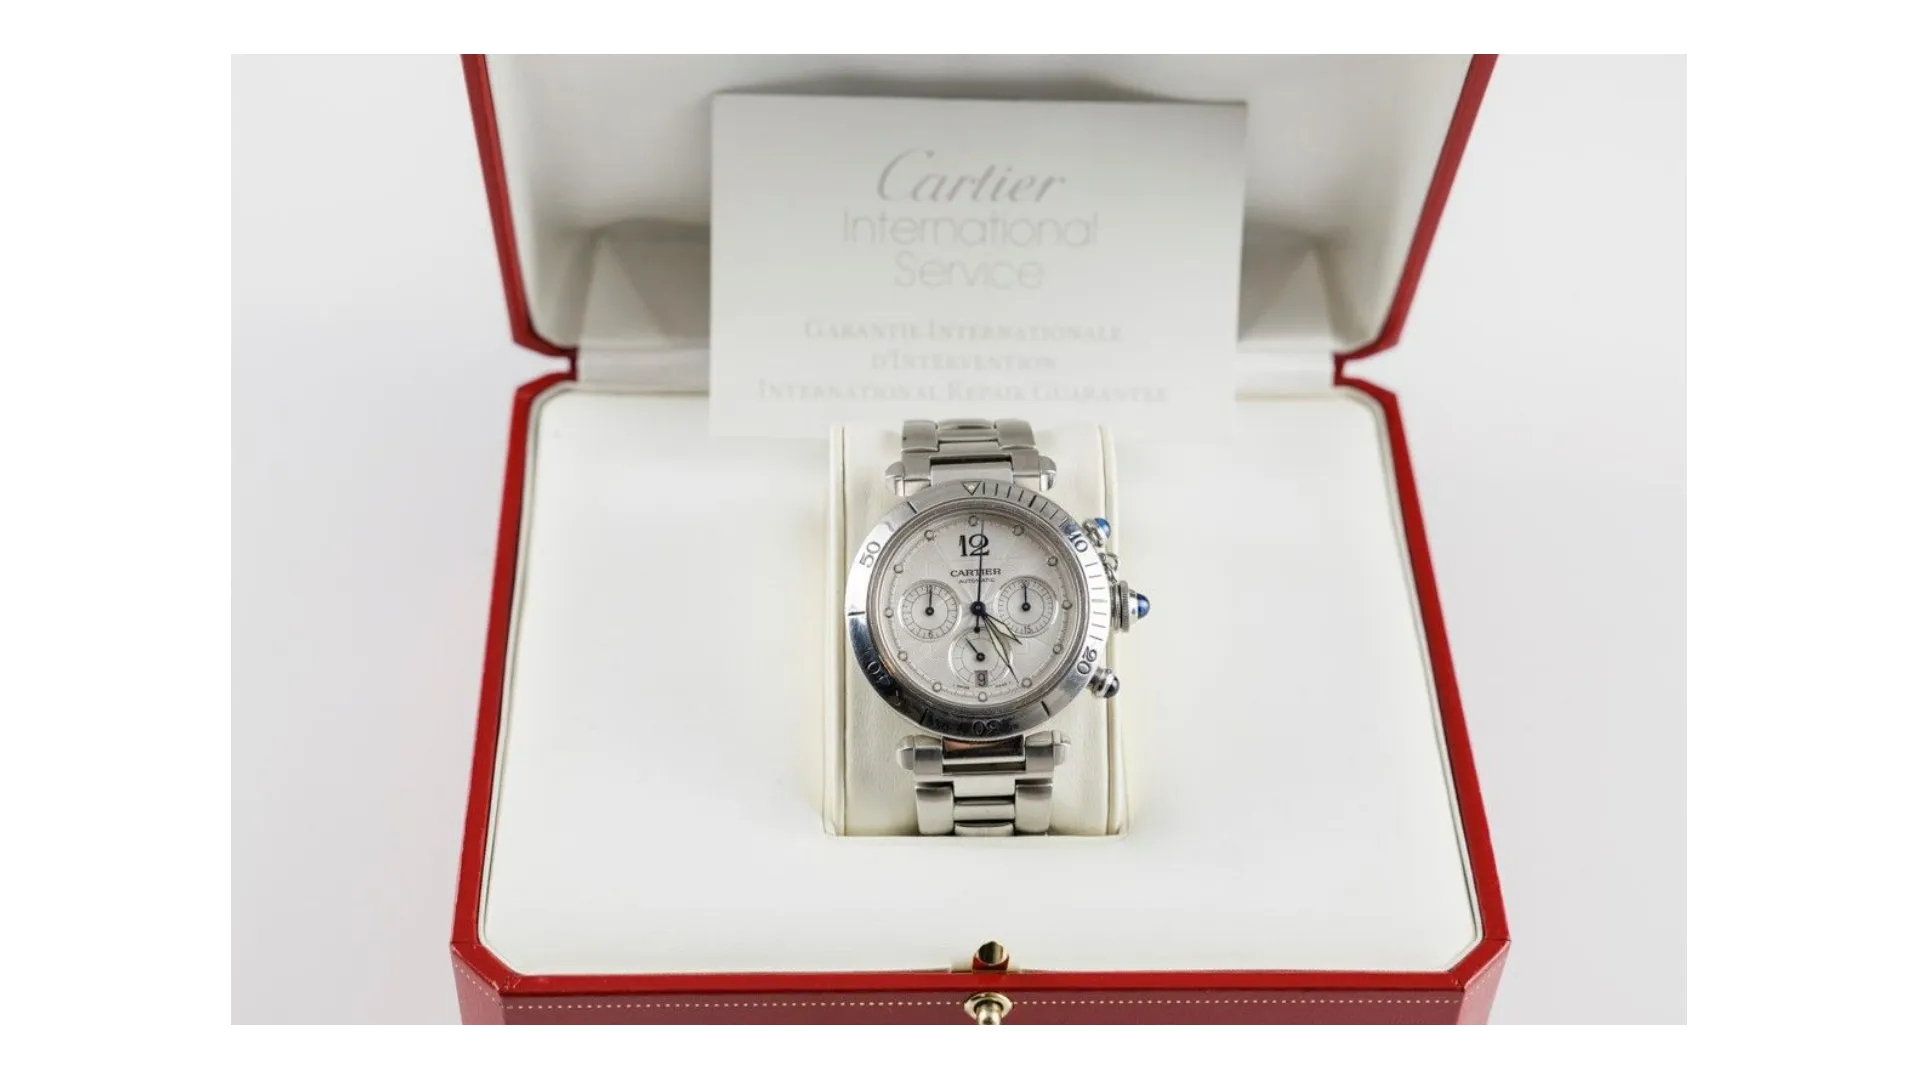 Cartier Pasha 2113 38mm Stainless steel